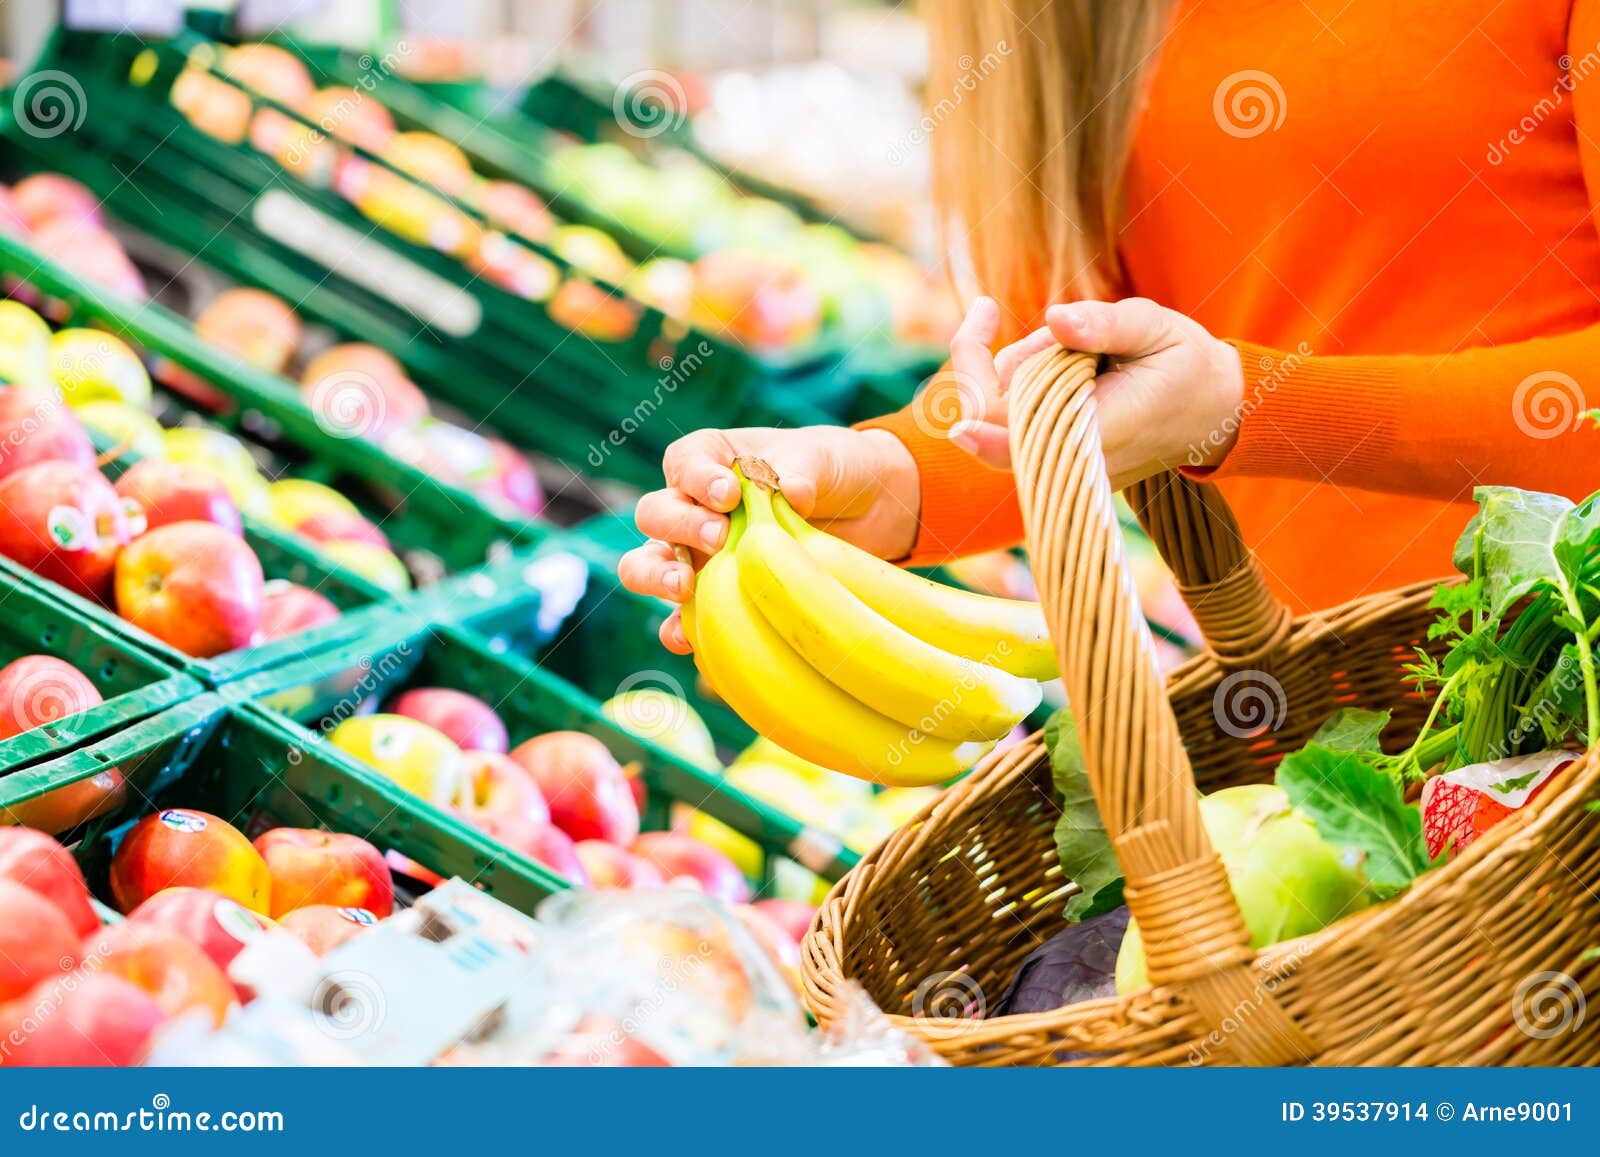 woman in supermarket shopping groceries